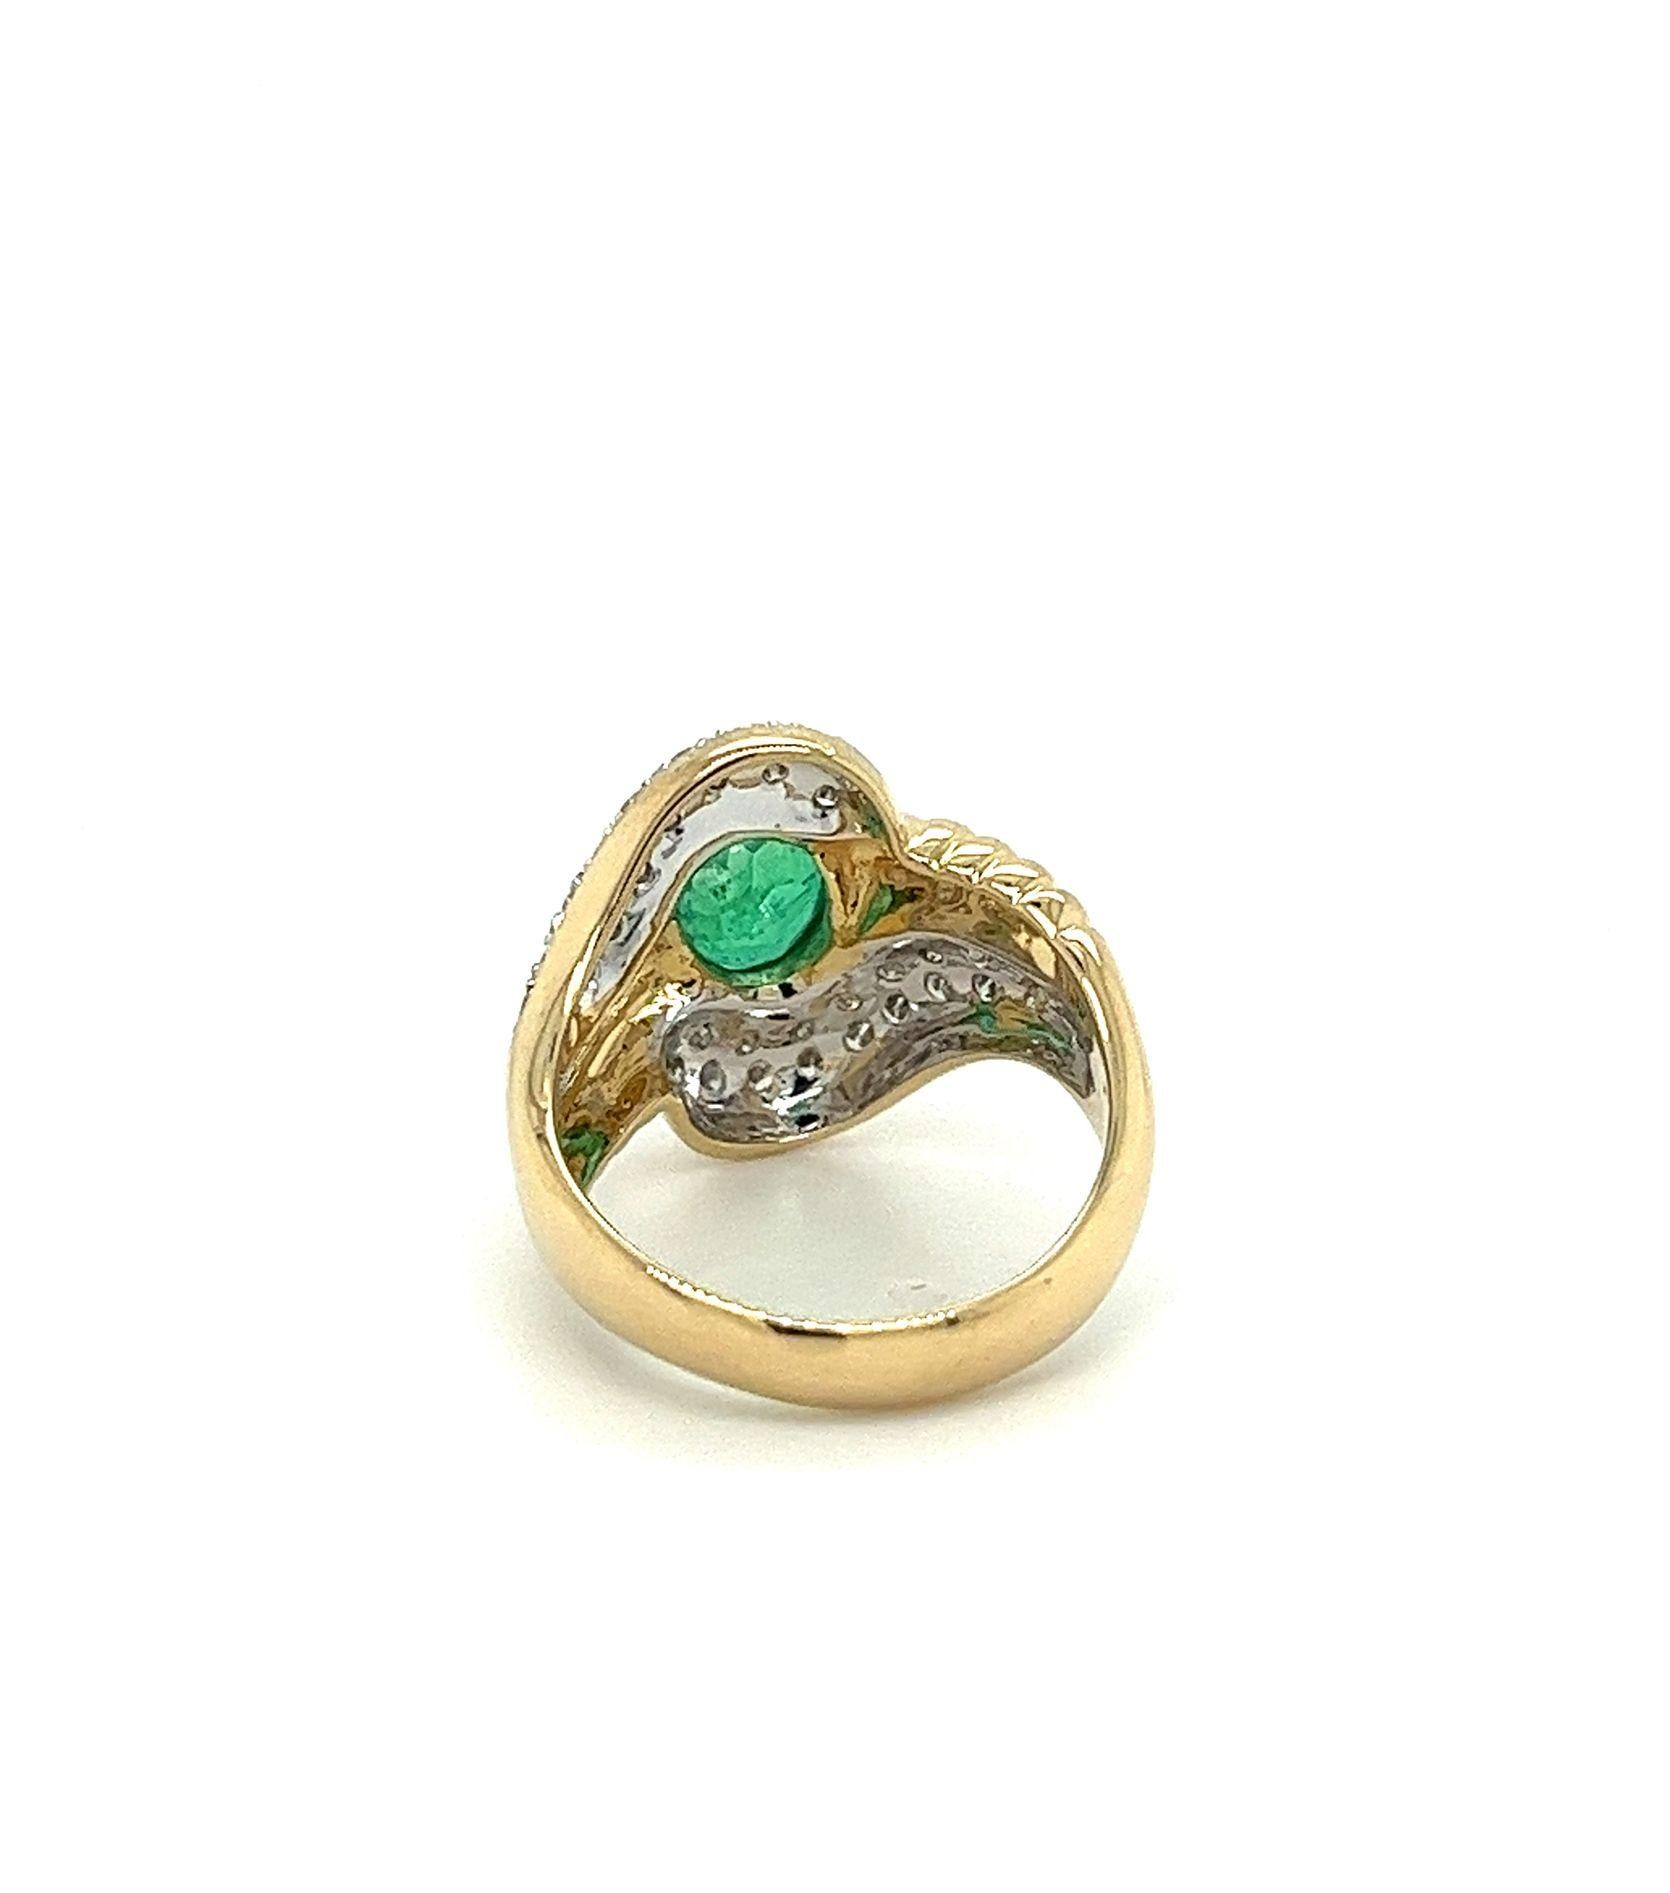 Natural emerald and diamond ring, featuring a magnificent 2.80-carat oval cut emerald, accompanied by 0.38 CTTW round cut diamond side stones, all beautifully set in a wavy textured 18K yellow gold motif. Set with an open back that allows for the